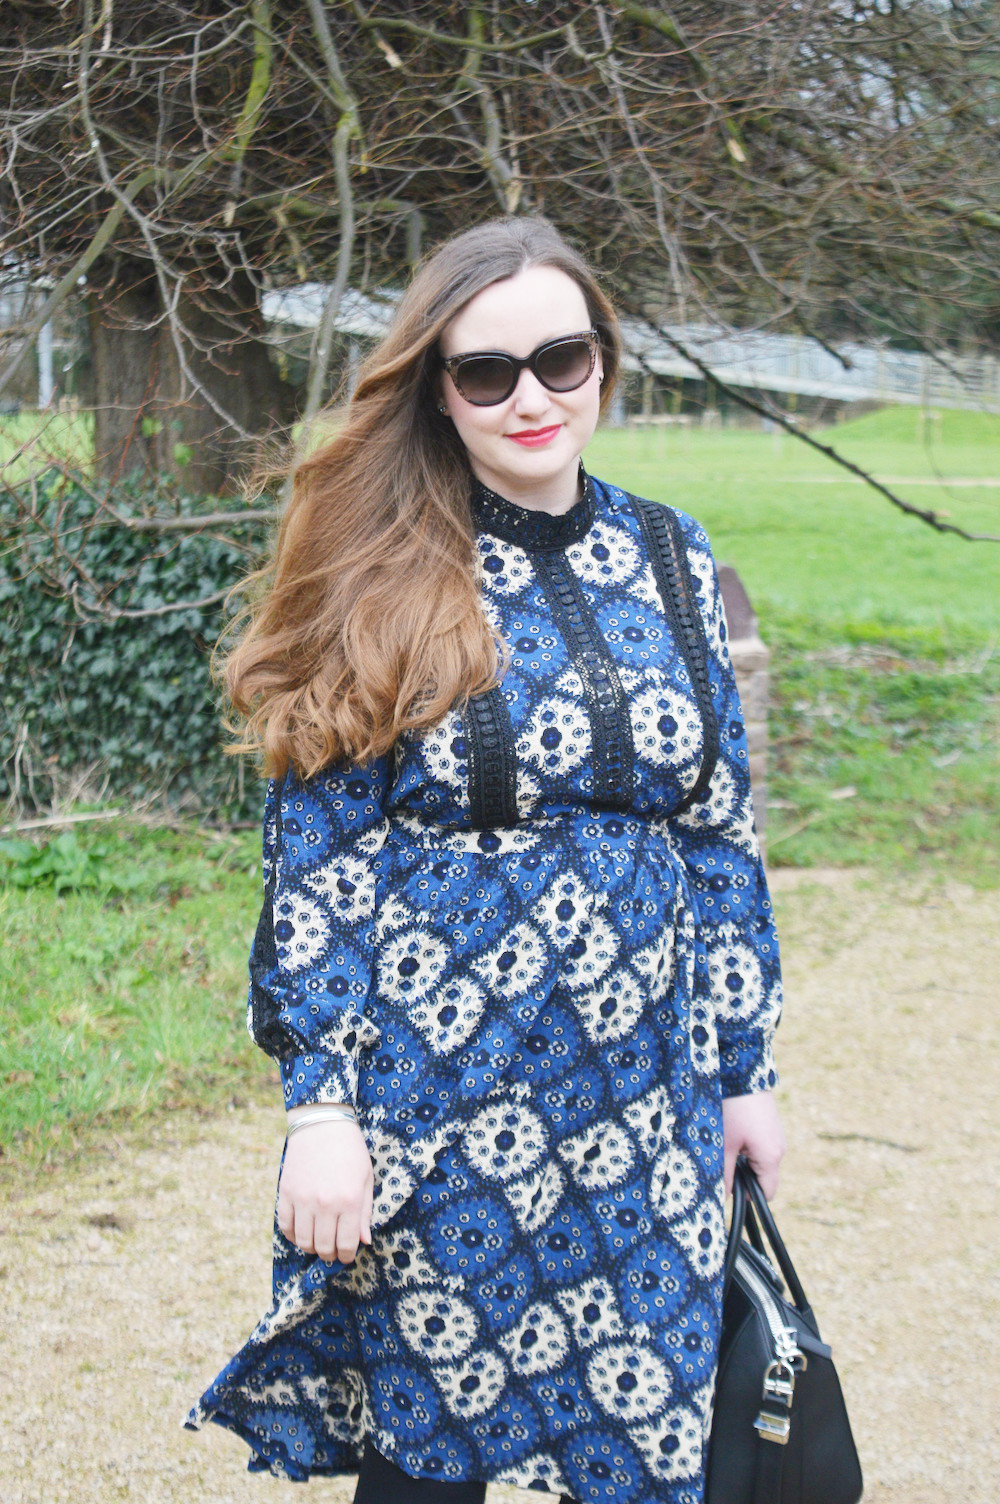 over 30s fashion style blogger